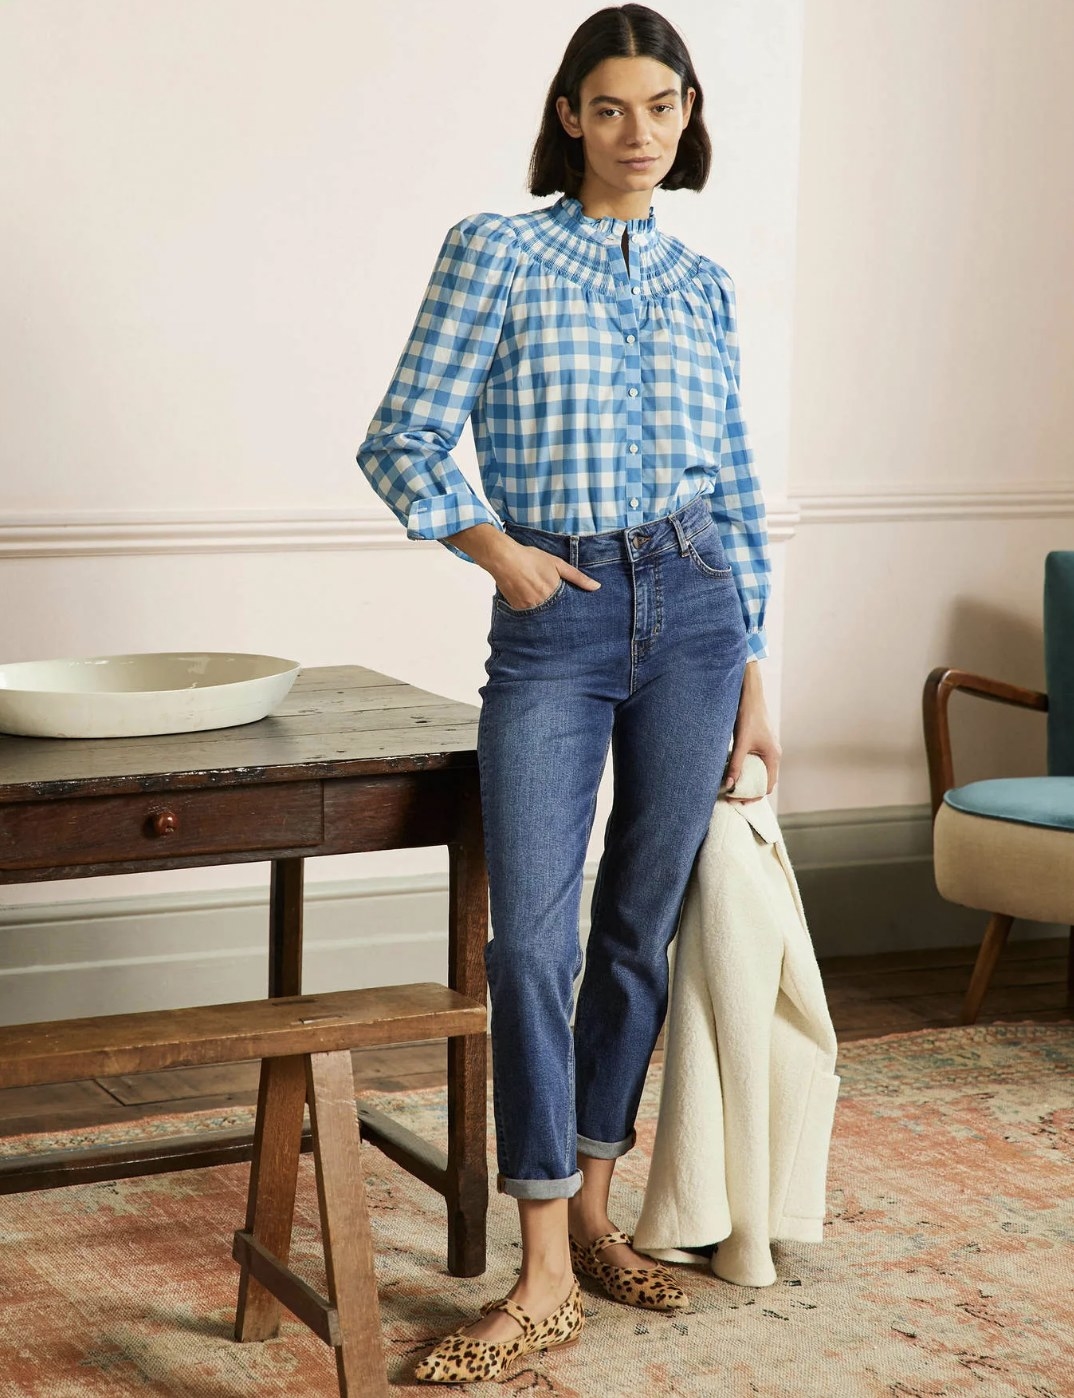 Model wearing the blue gingham blouse tucked into jeans